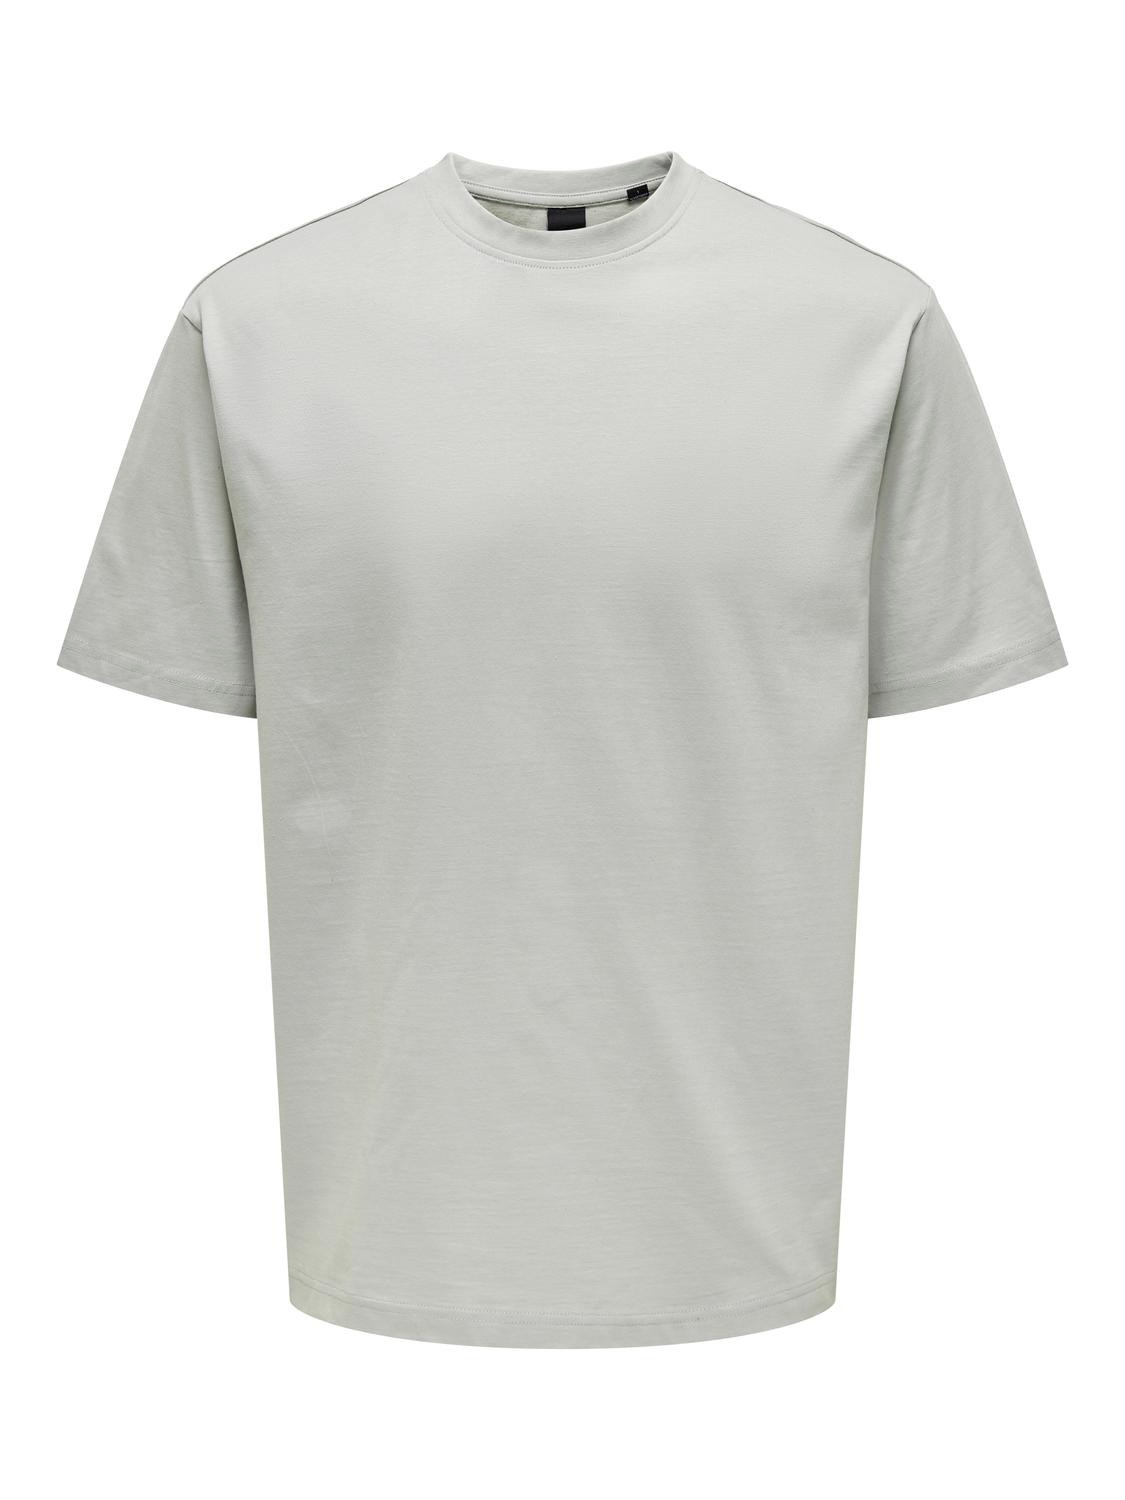 ONLY & SONS Relaxed Fit Round Neck T-Shirt -Mirage Gray - 22022532